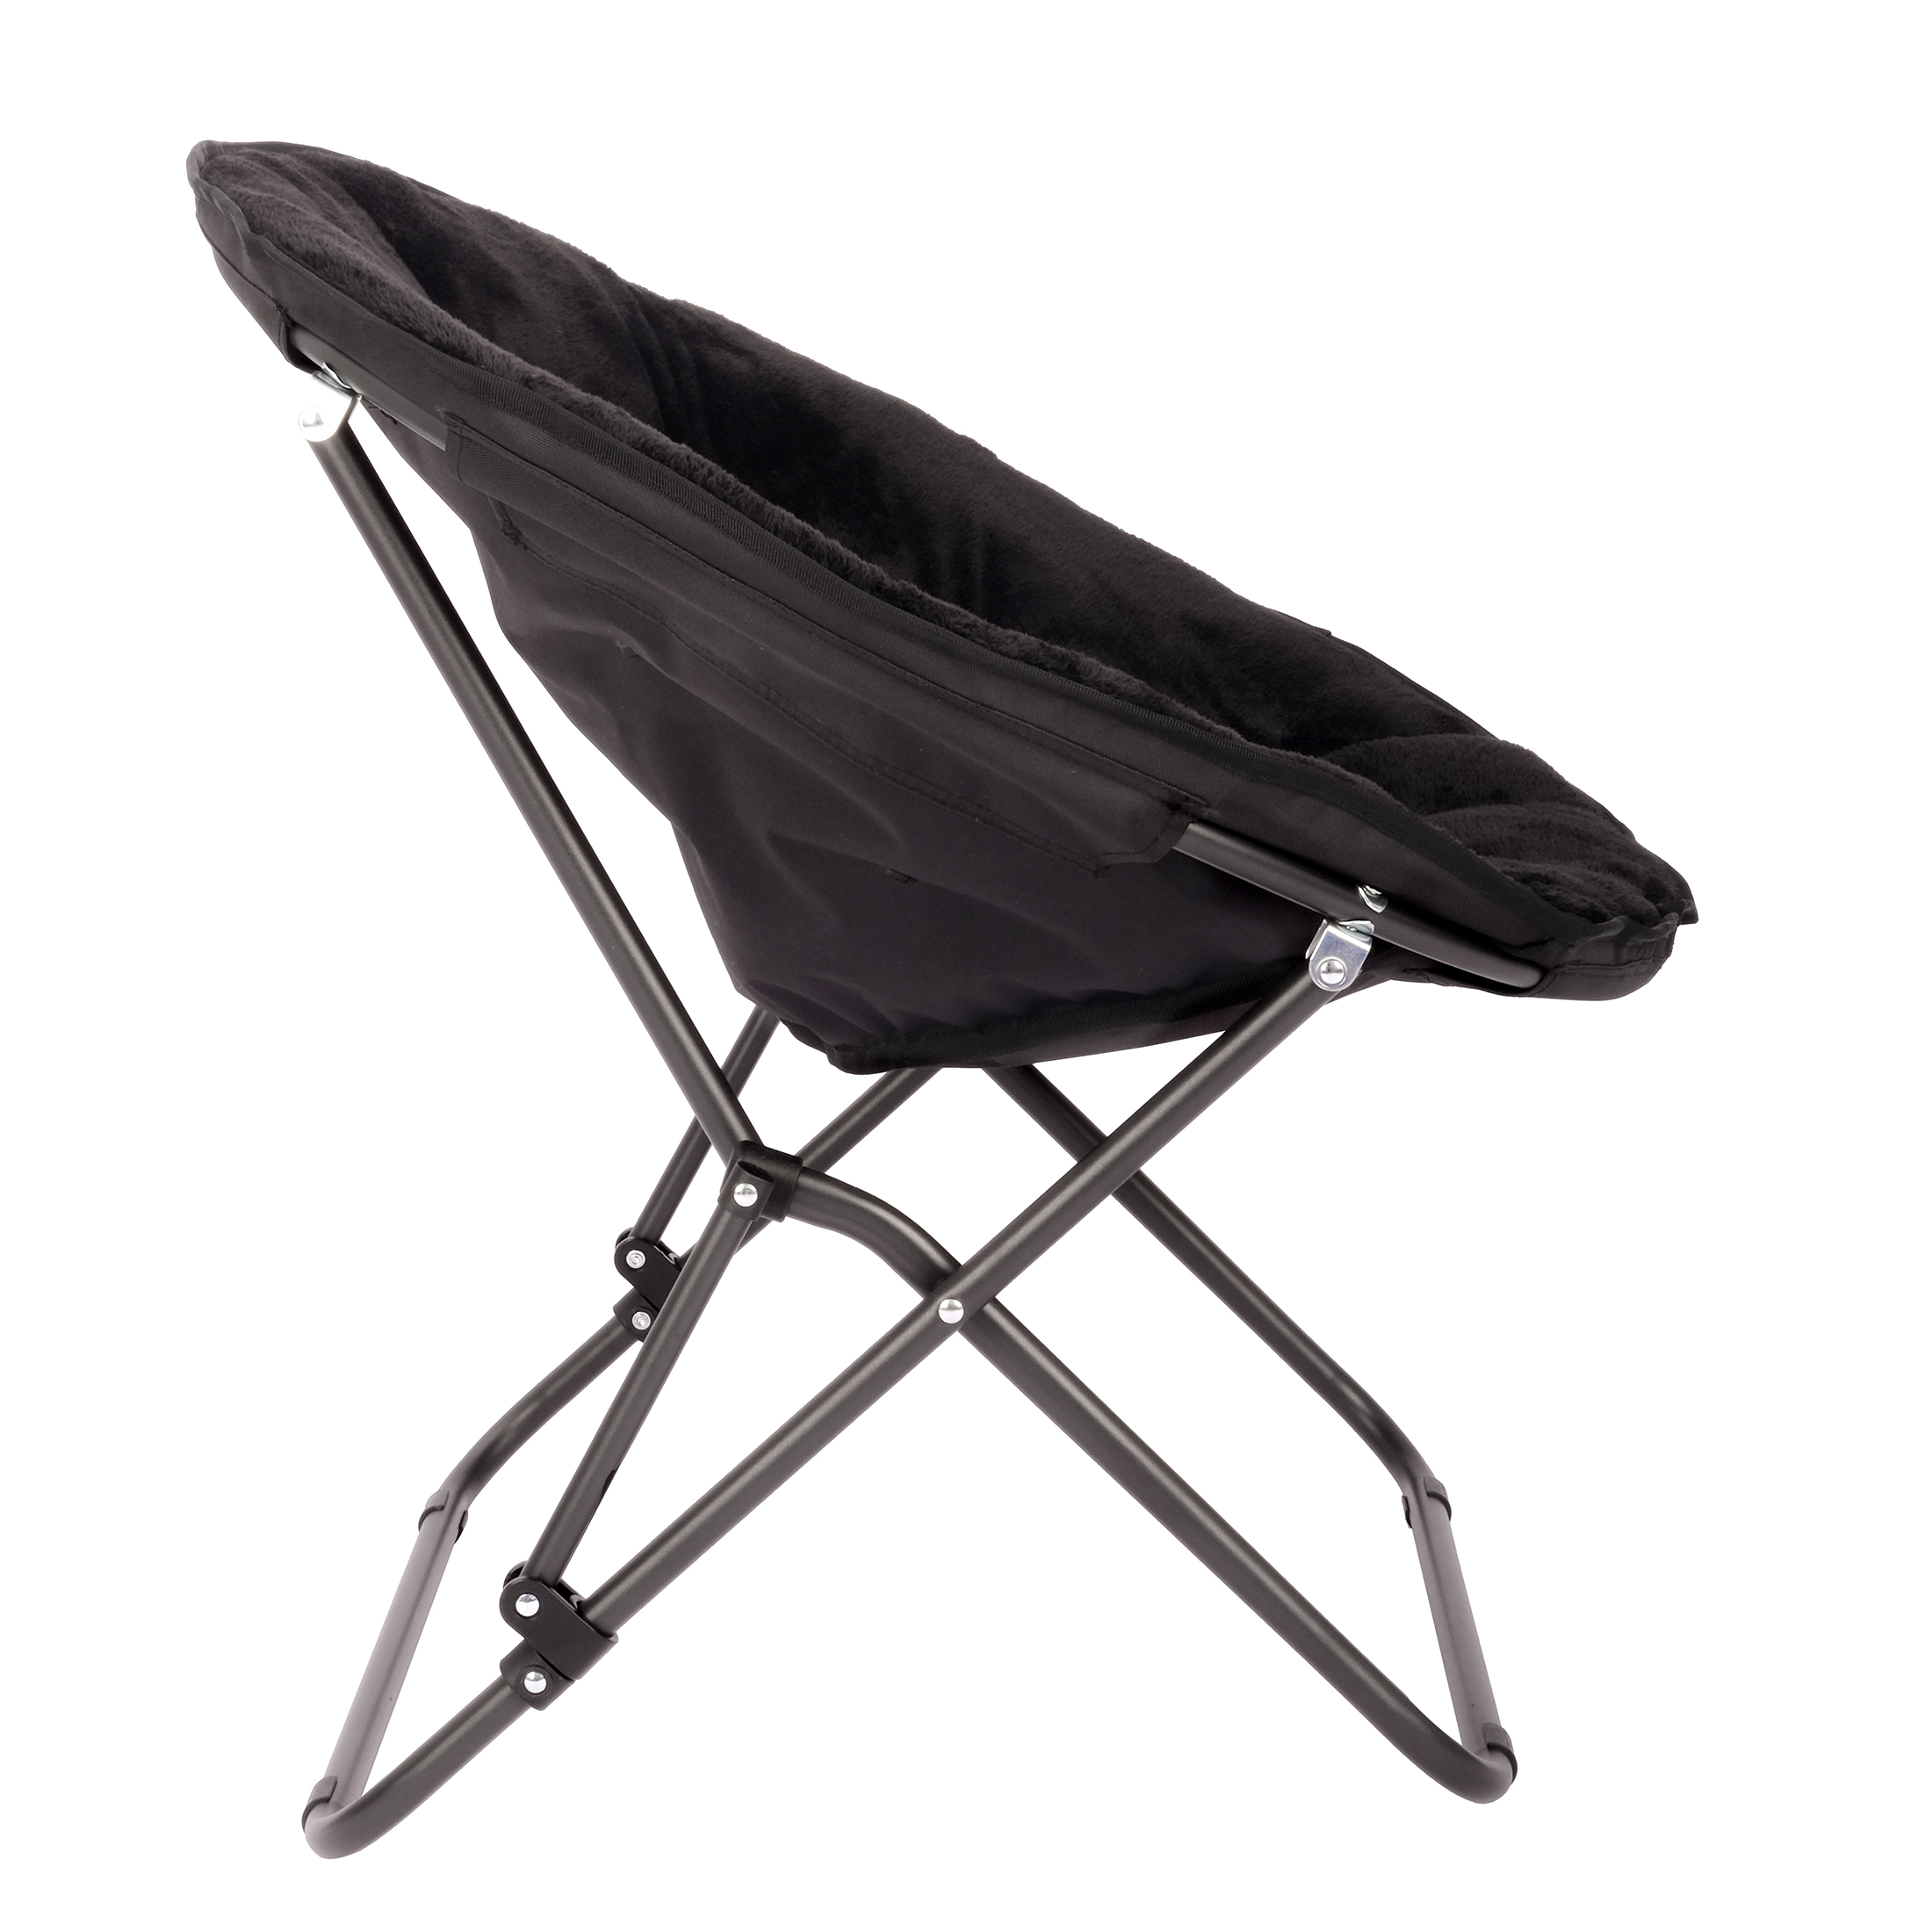 Mainstays Saucer Chair for Kids and Teens, Black - image 4 of 6